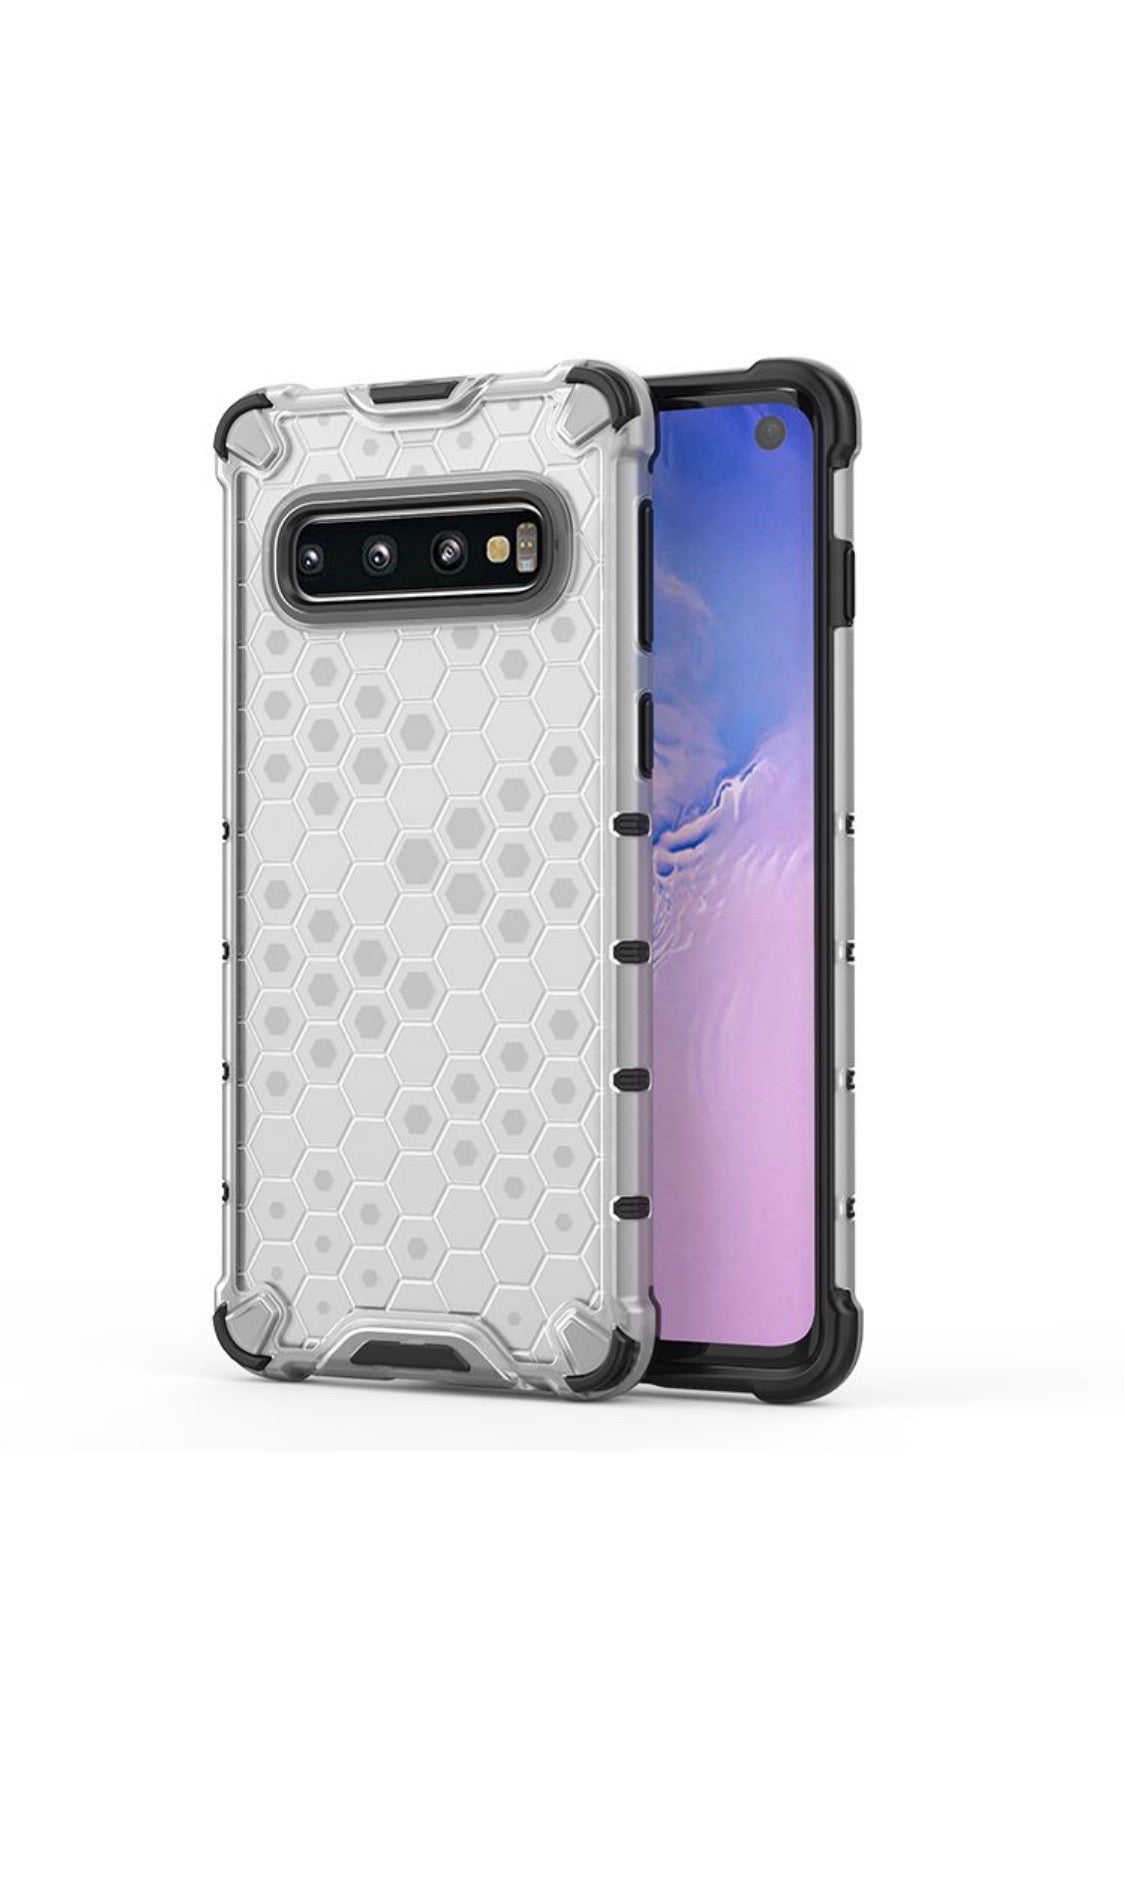 Samsung Galaxy S10E Shockproof Honeycomb Cover